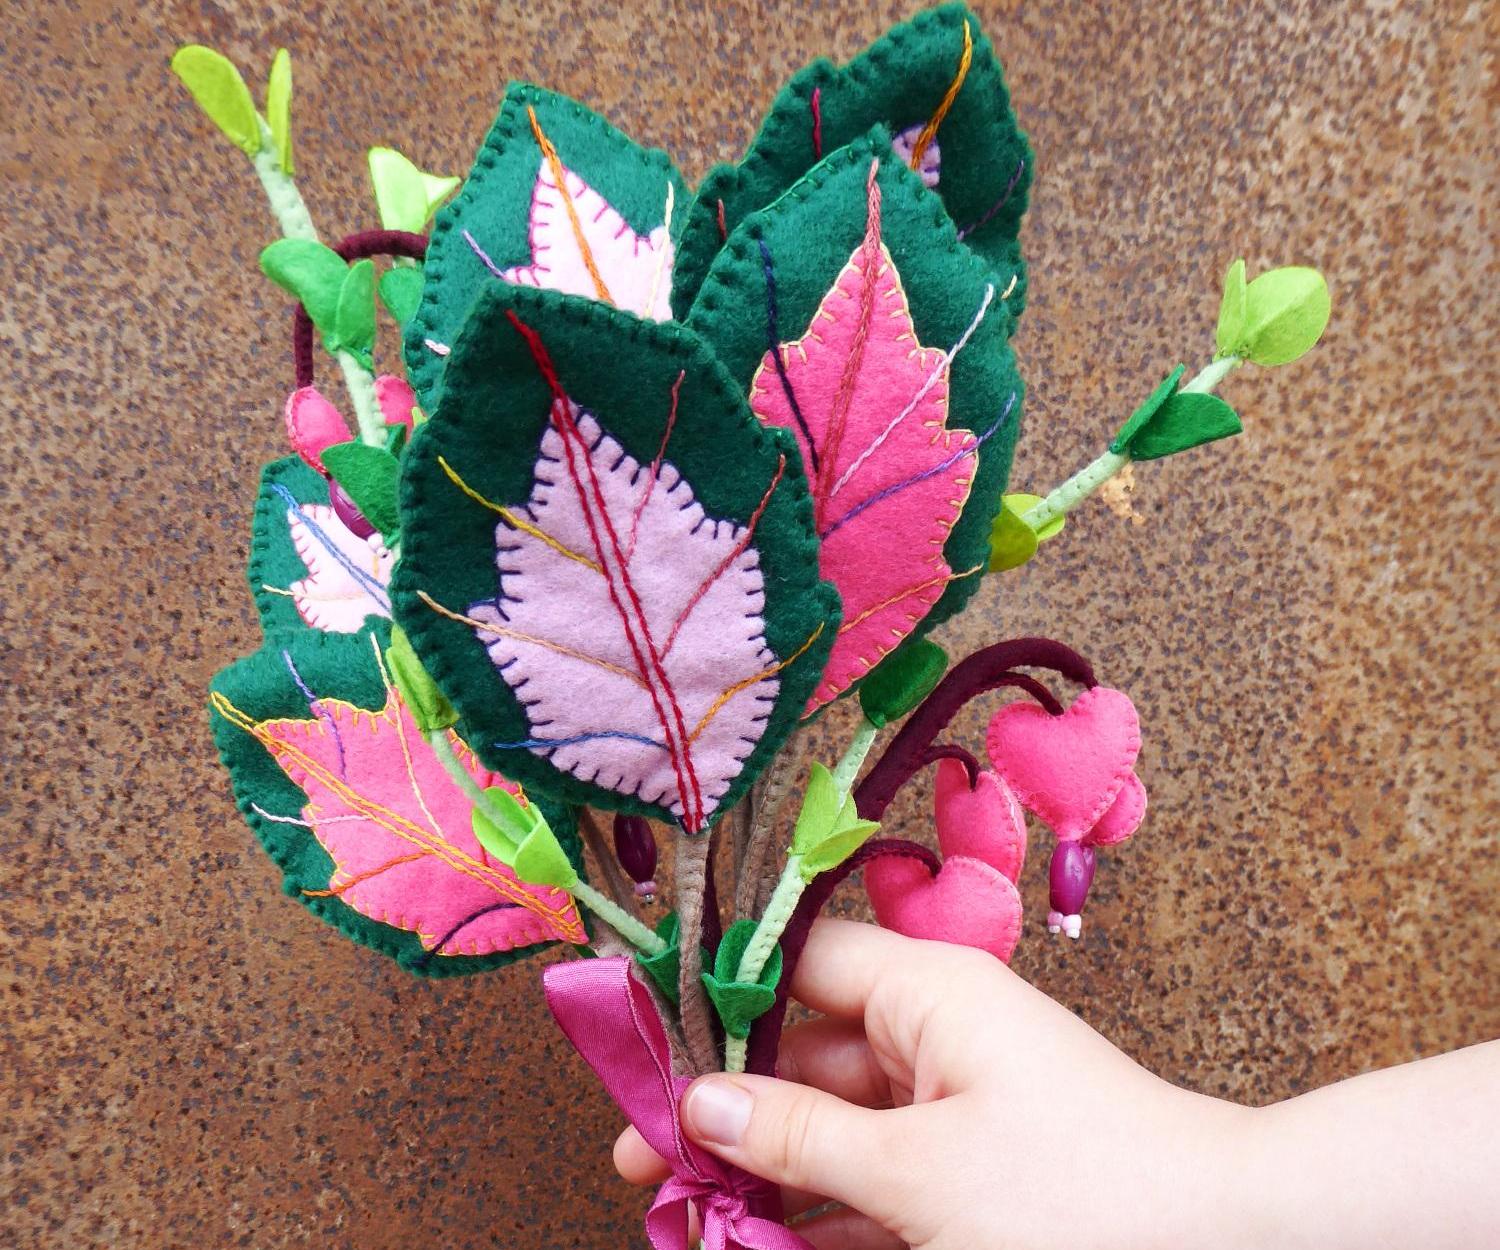 Forever Flowers - a Stitched Felt Flower Bouquet